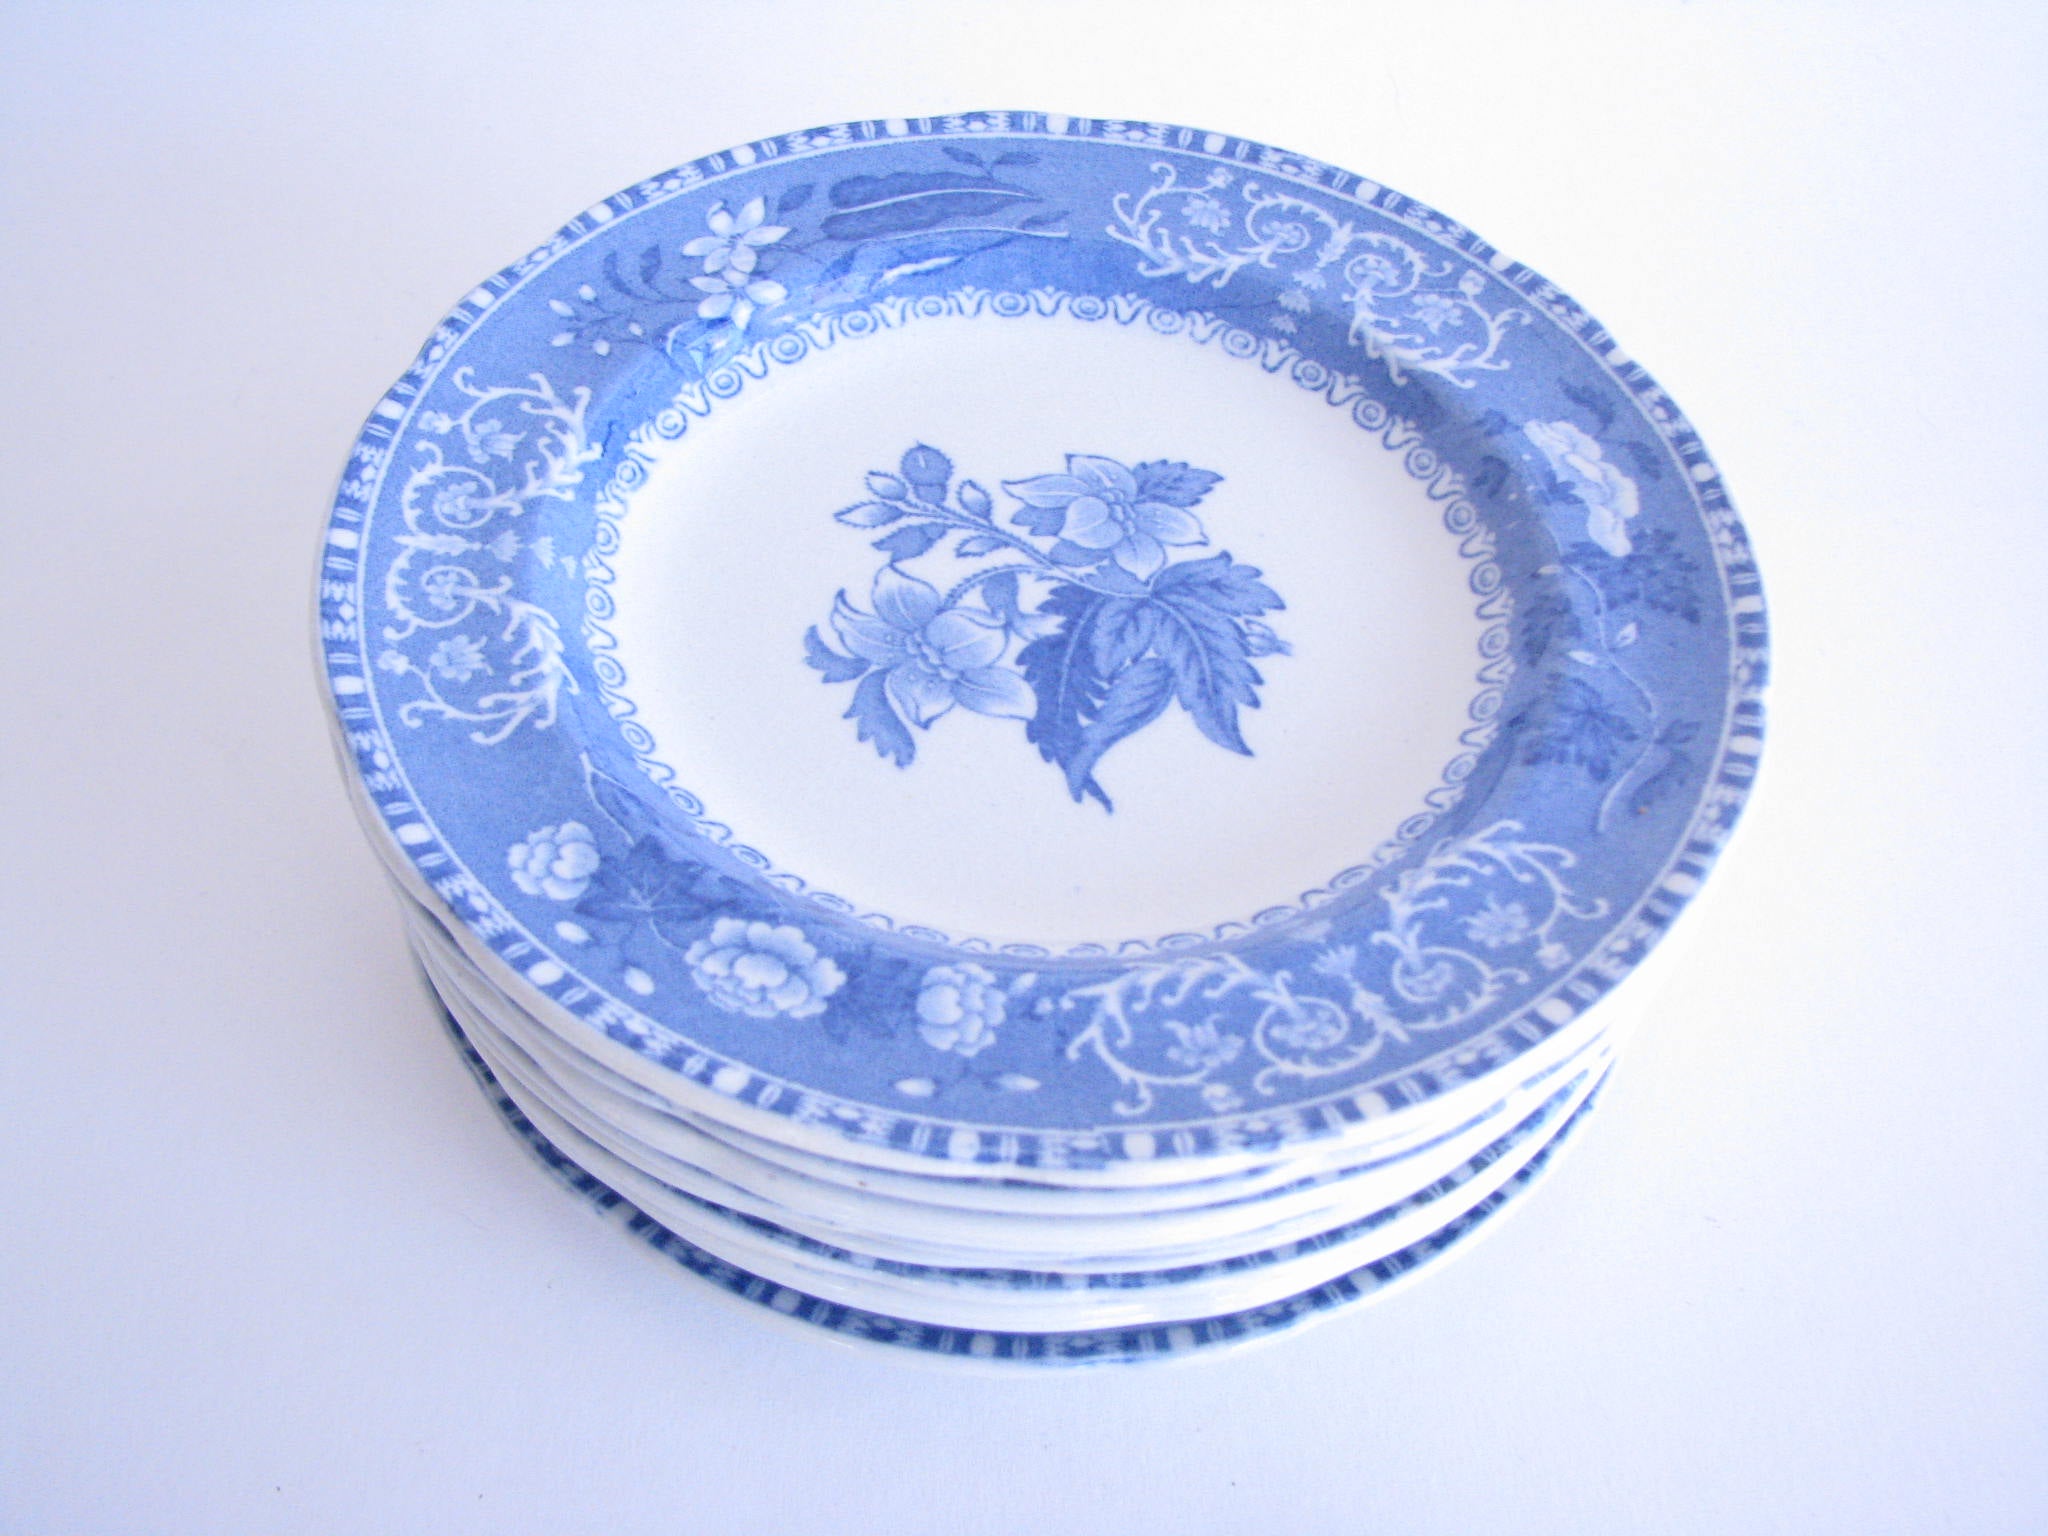 edgebrookhouse - Early 20th Century Spode Camilla Blue and White Bread or Dessert Plates - Set of 10